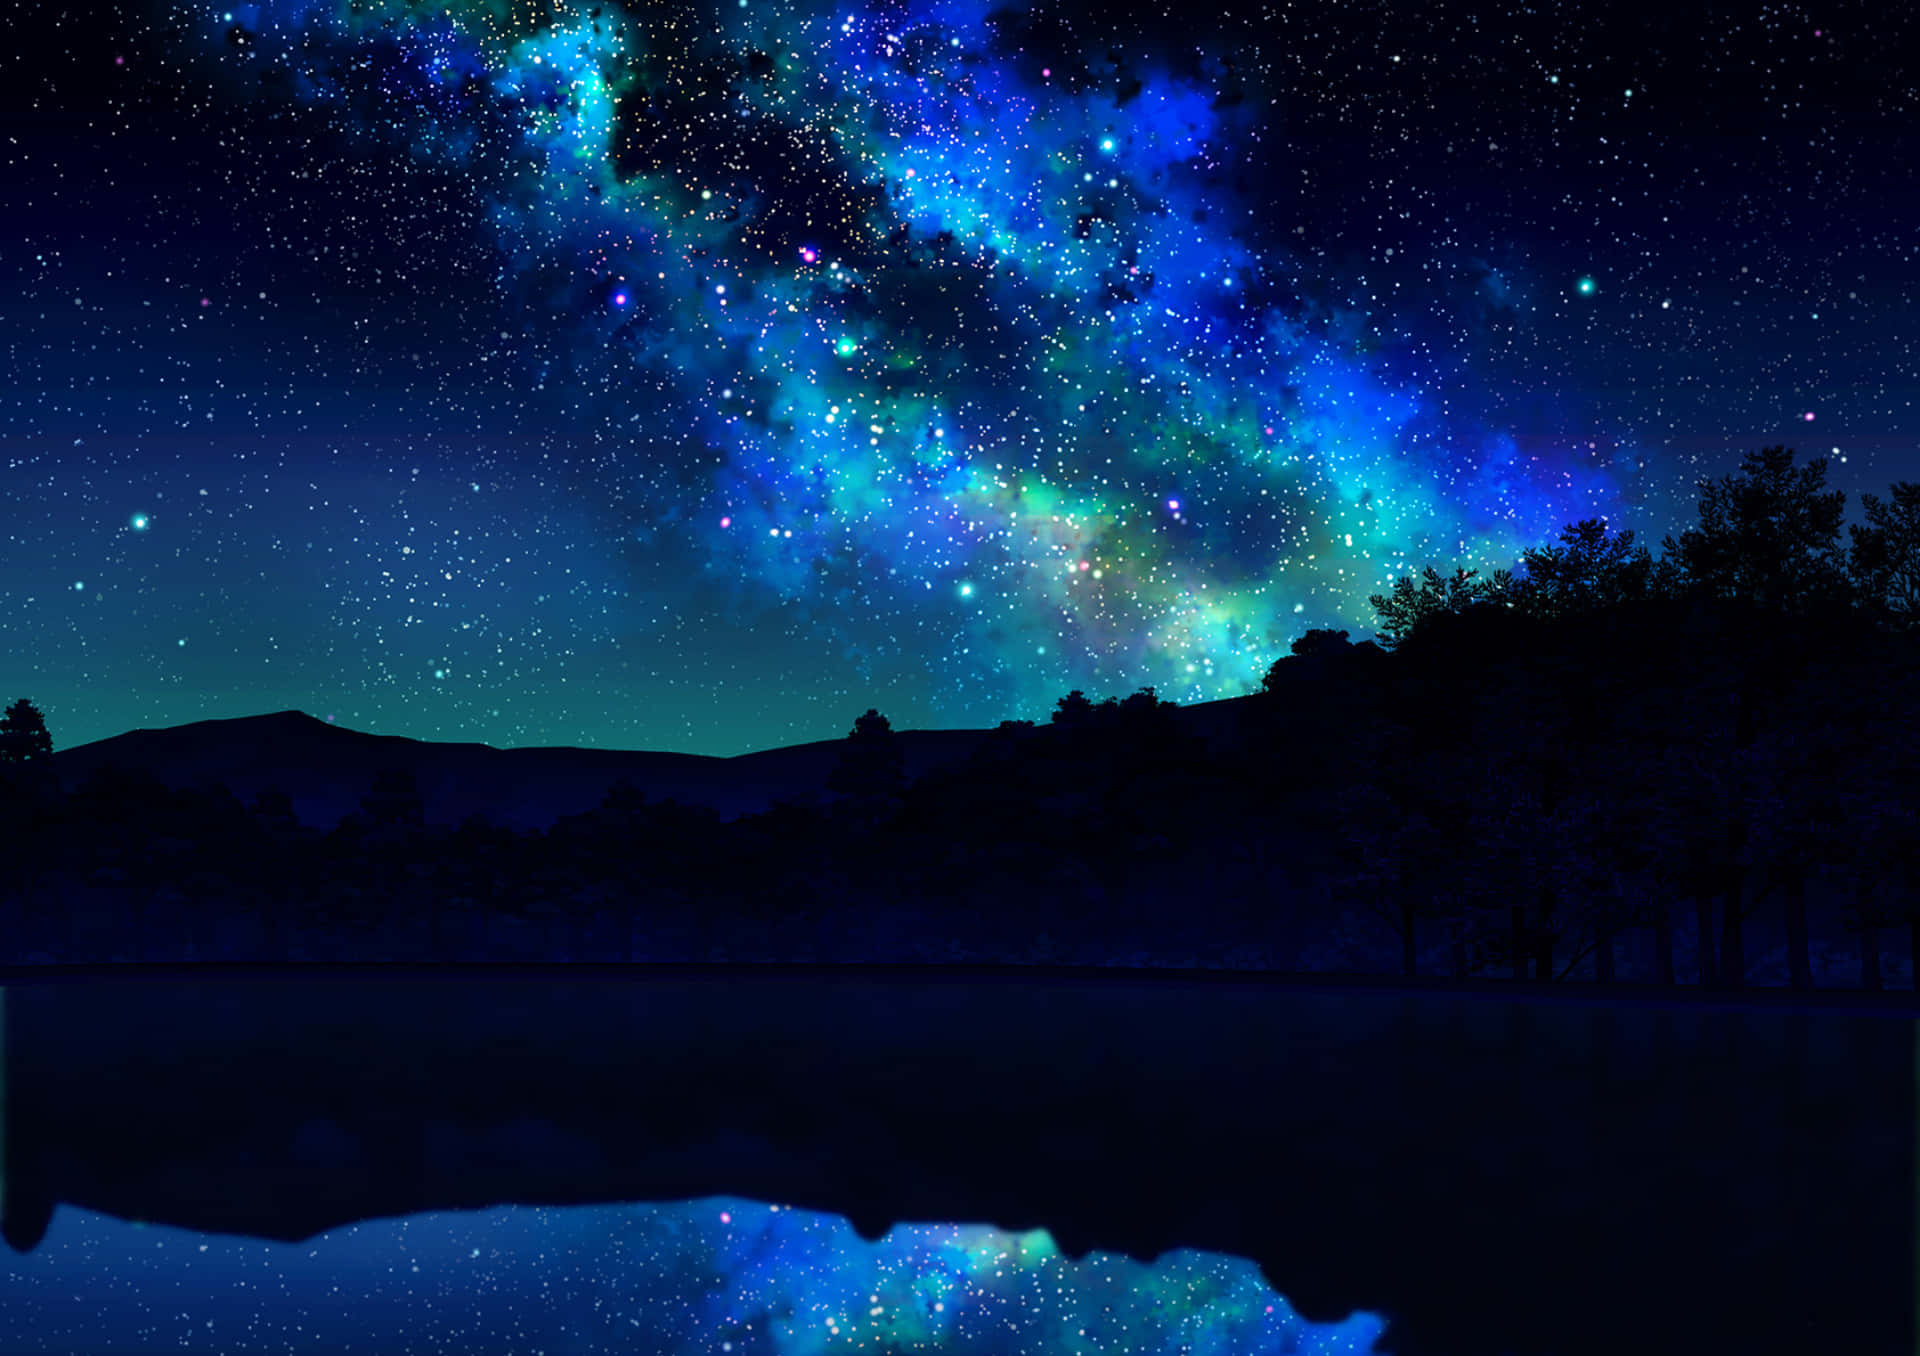 A Magical World Awaits with Anime Night Scenery Wallpaper